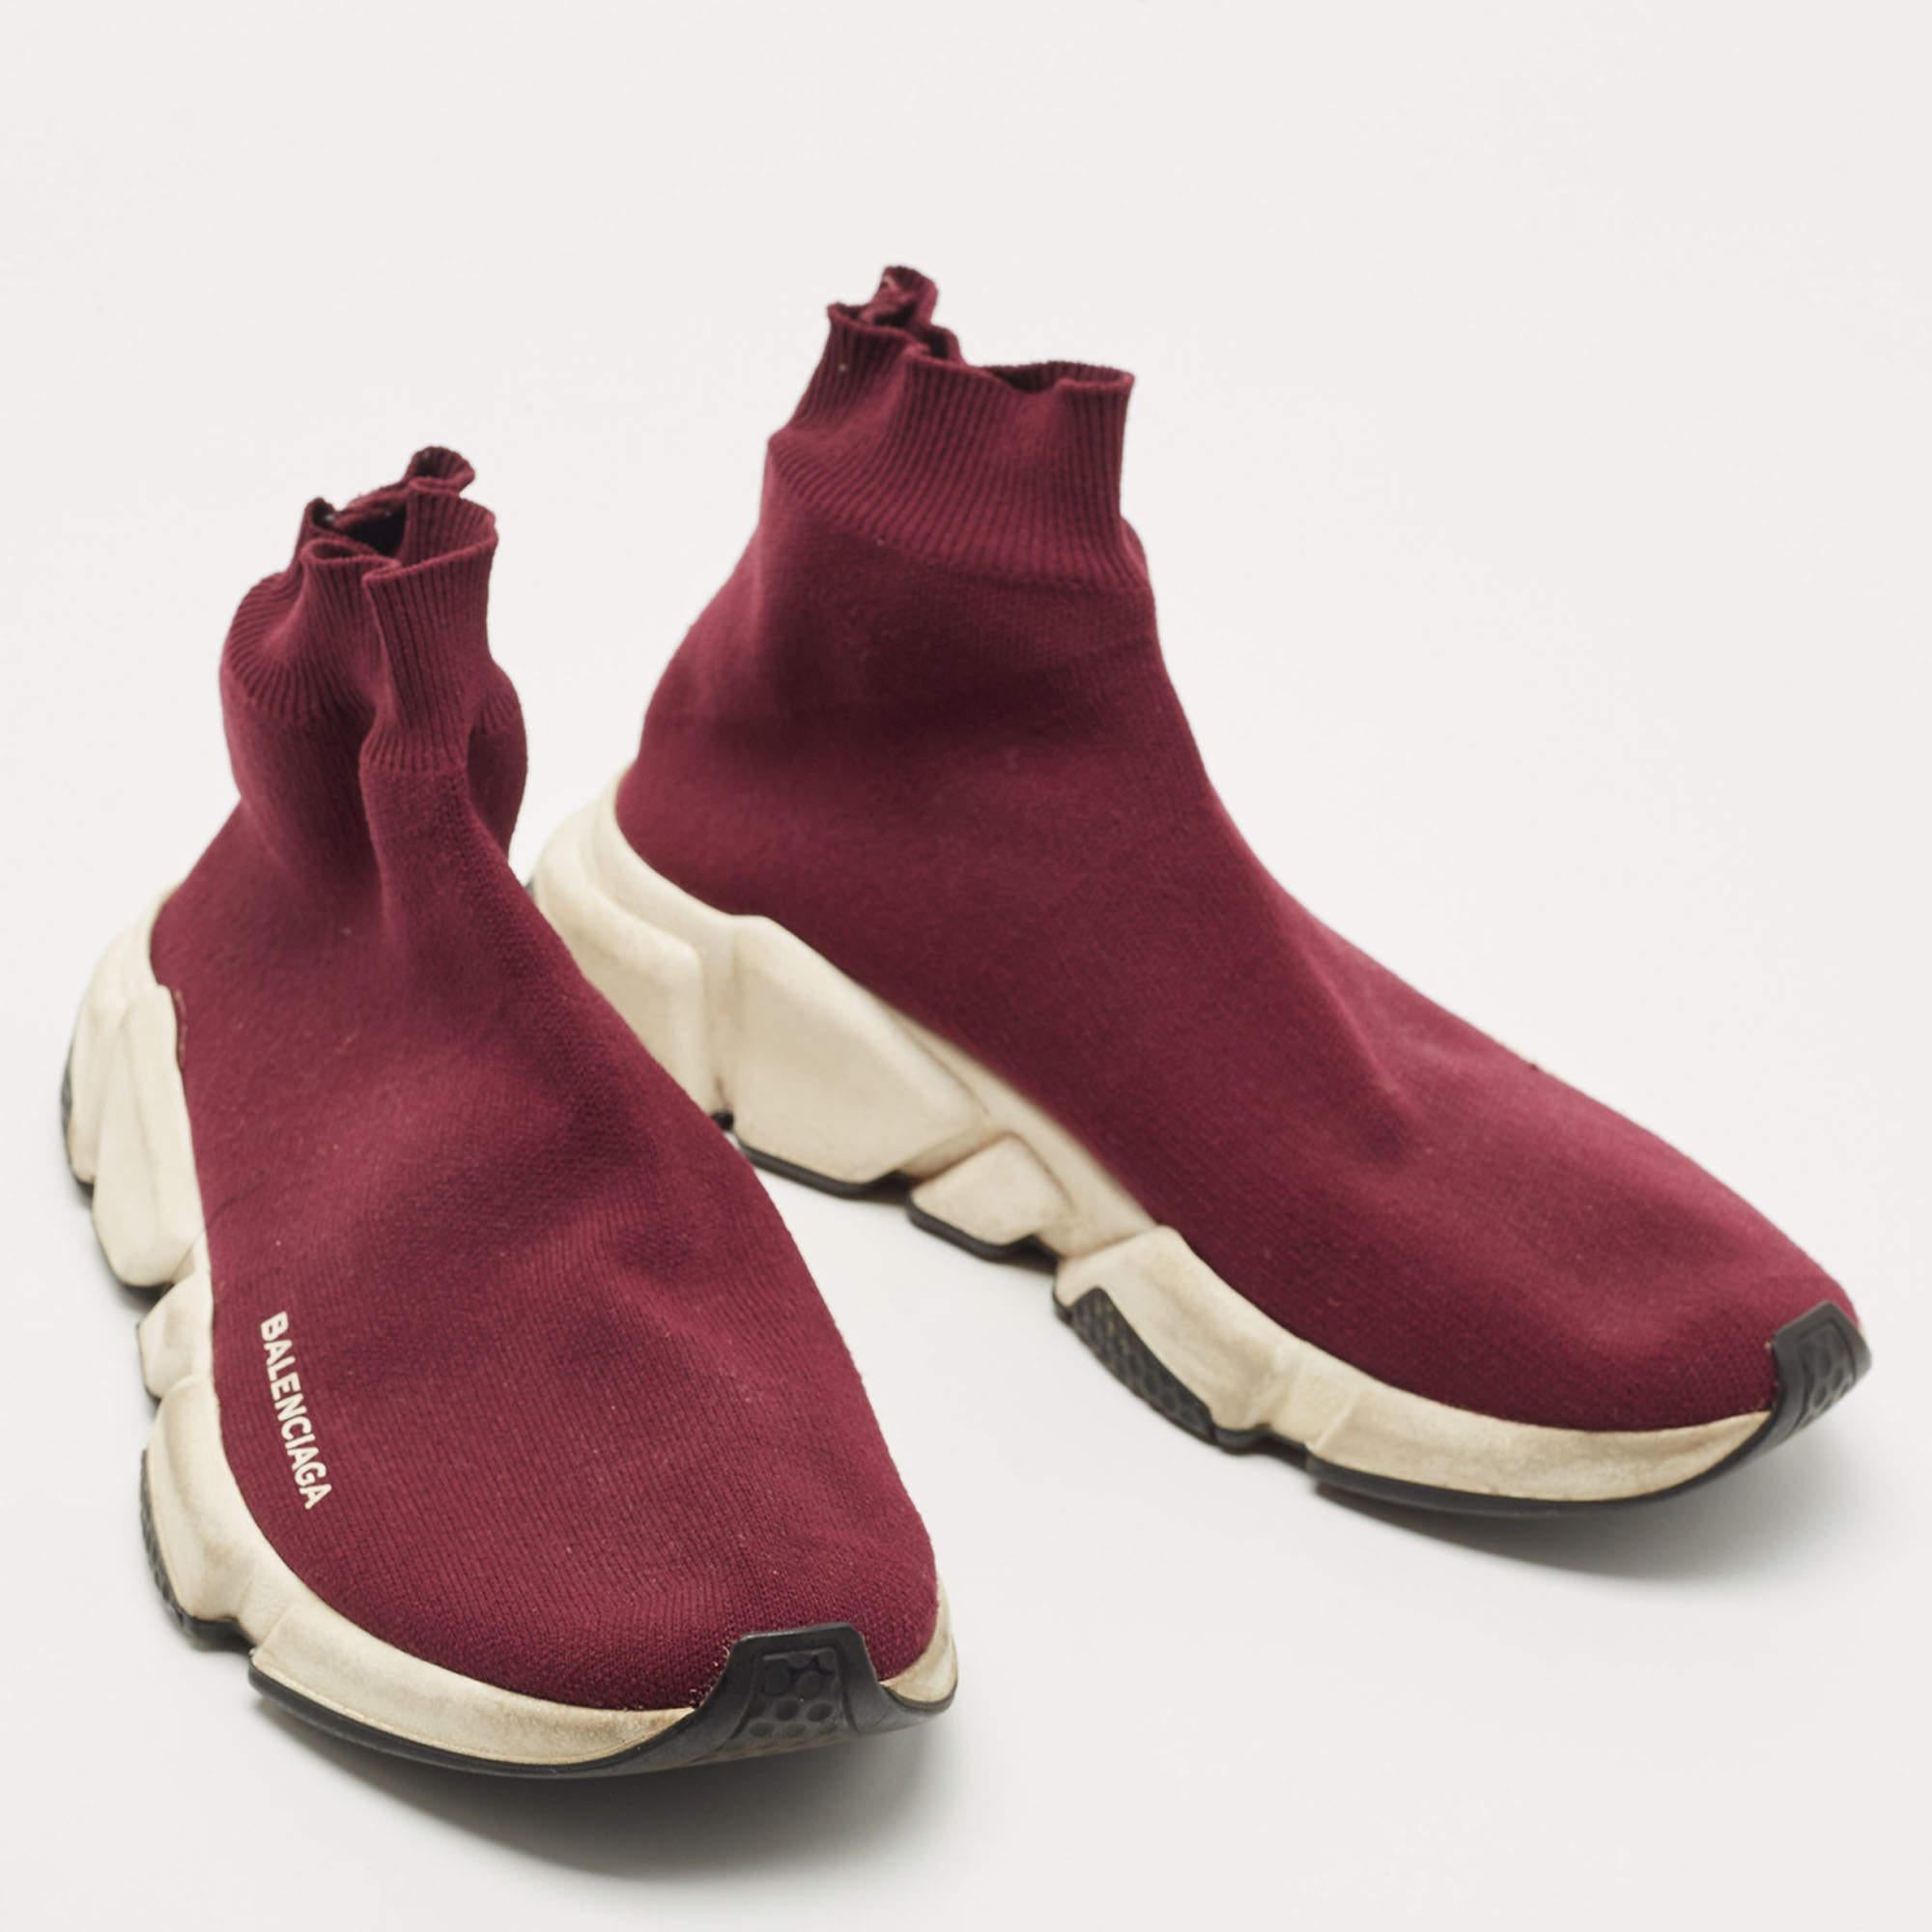 Coming in a cool silhouette, these designer sneakers are a seamless combination of luxury, comfort, and style. These sneakers are designed with signature details and comfortable insoles.

